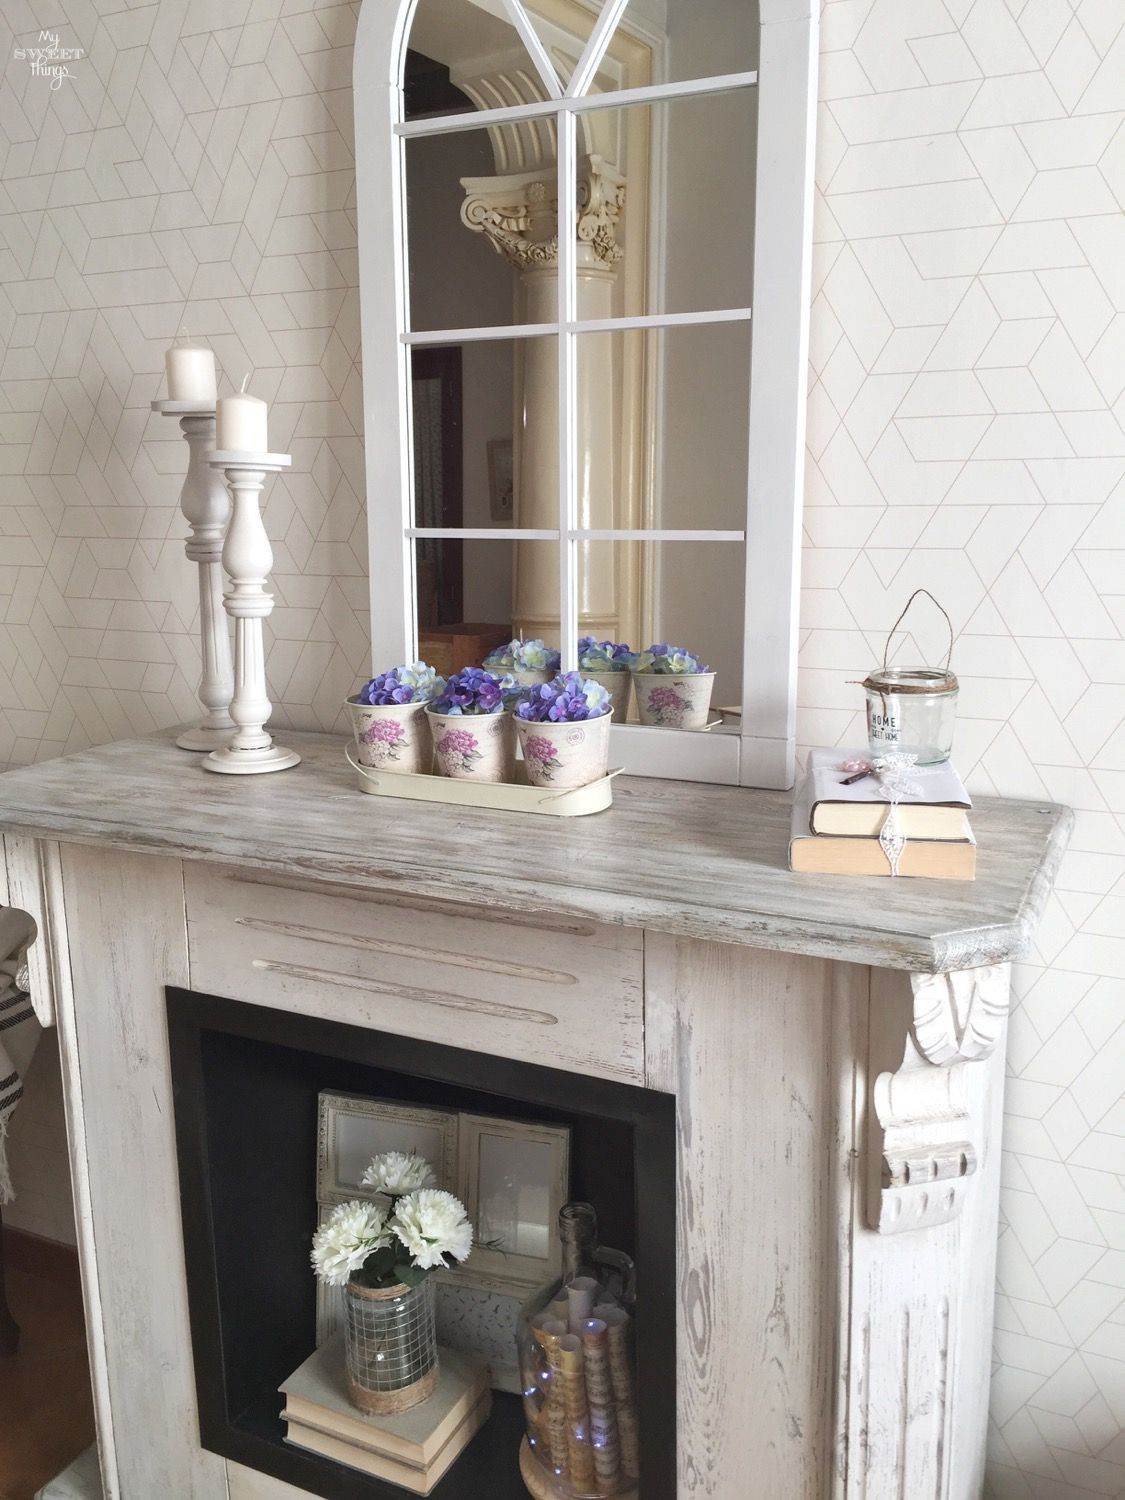 How to update an old wooden fireplace · Fireplace makeover · Via www.sweethings.net 